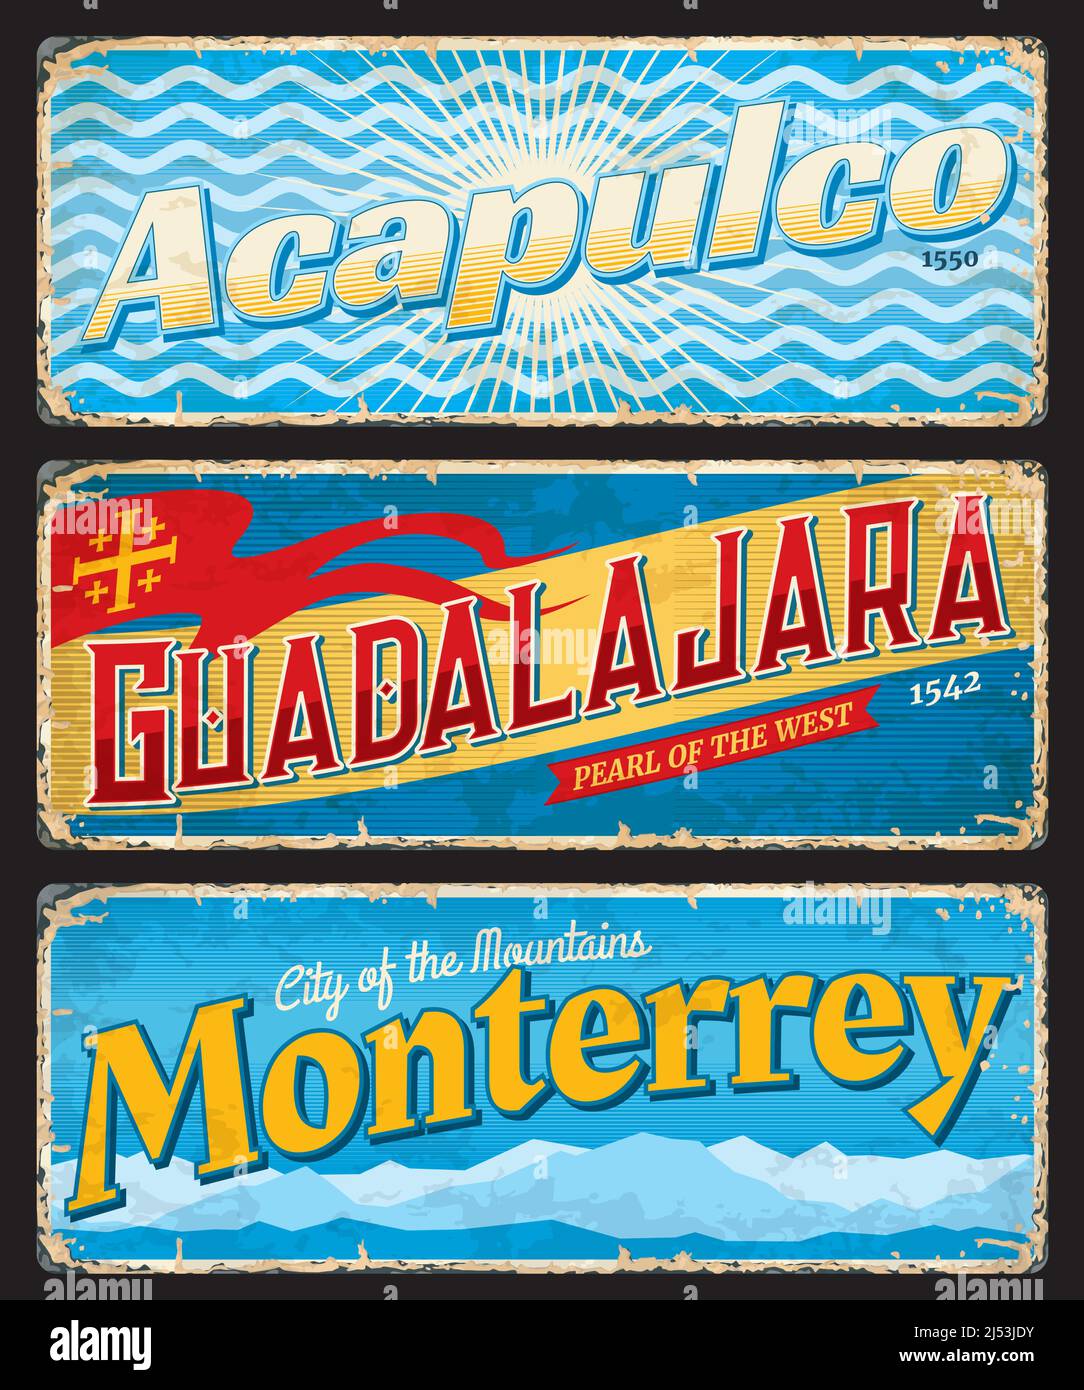 Monterrey, Guadalajara, Acapulco city travel plates and stickers. Mexican vacation journey vintage tin sign or retro banners with city flags. South America travel postcard or tourism grungy sticker Stock Vector